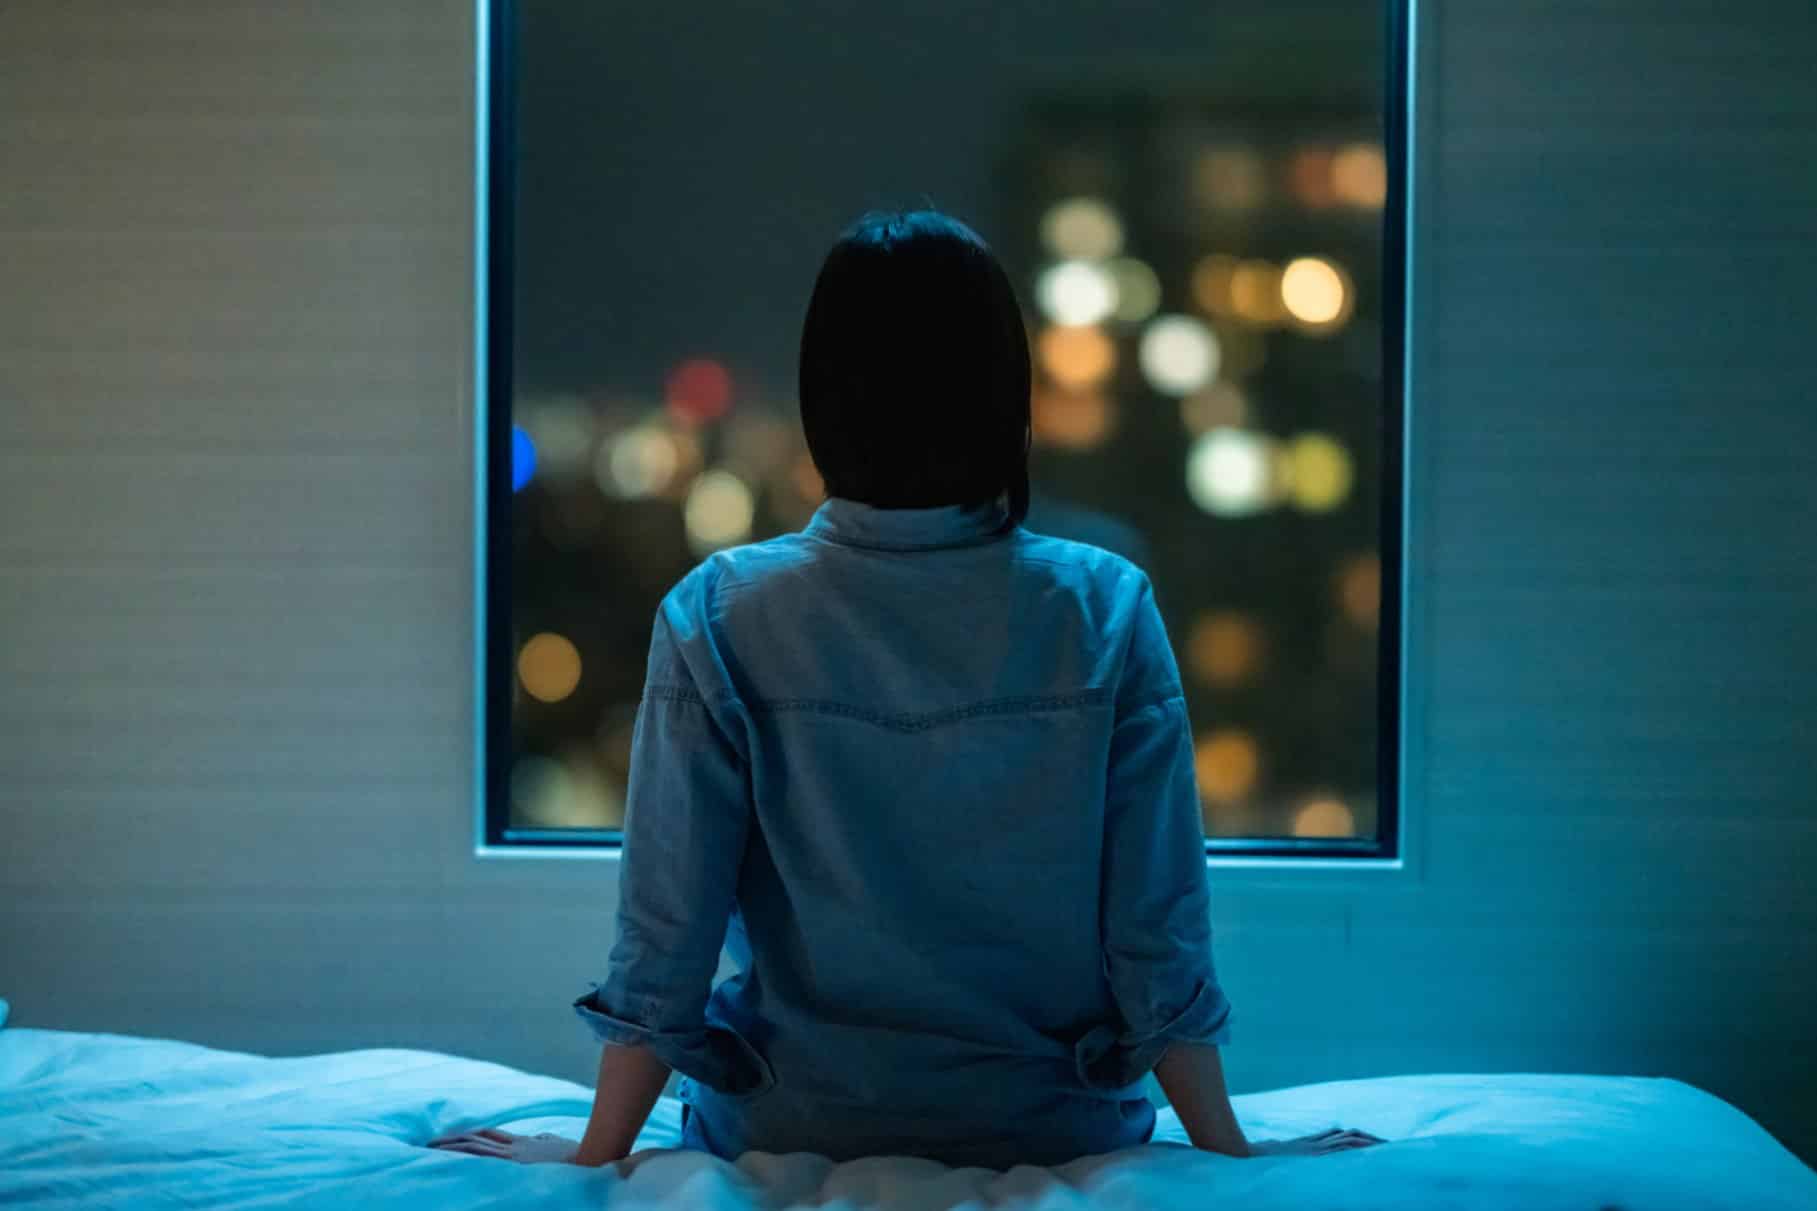 Insomnia: Symptoms, Causes, and Treatment 